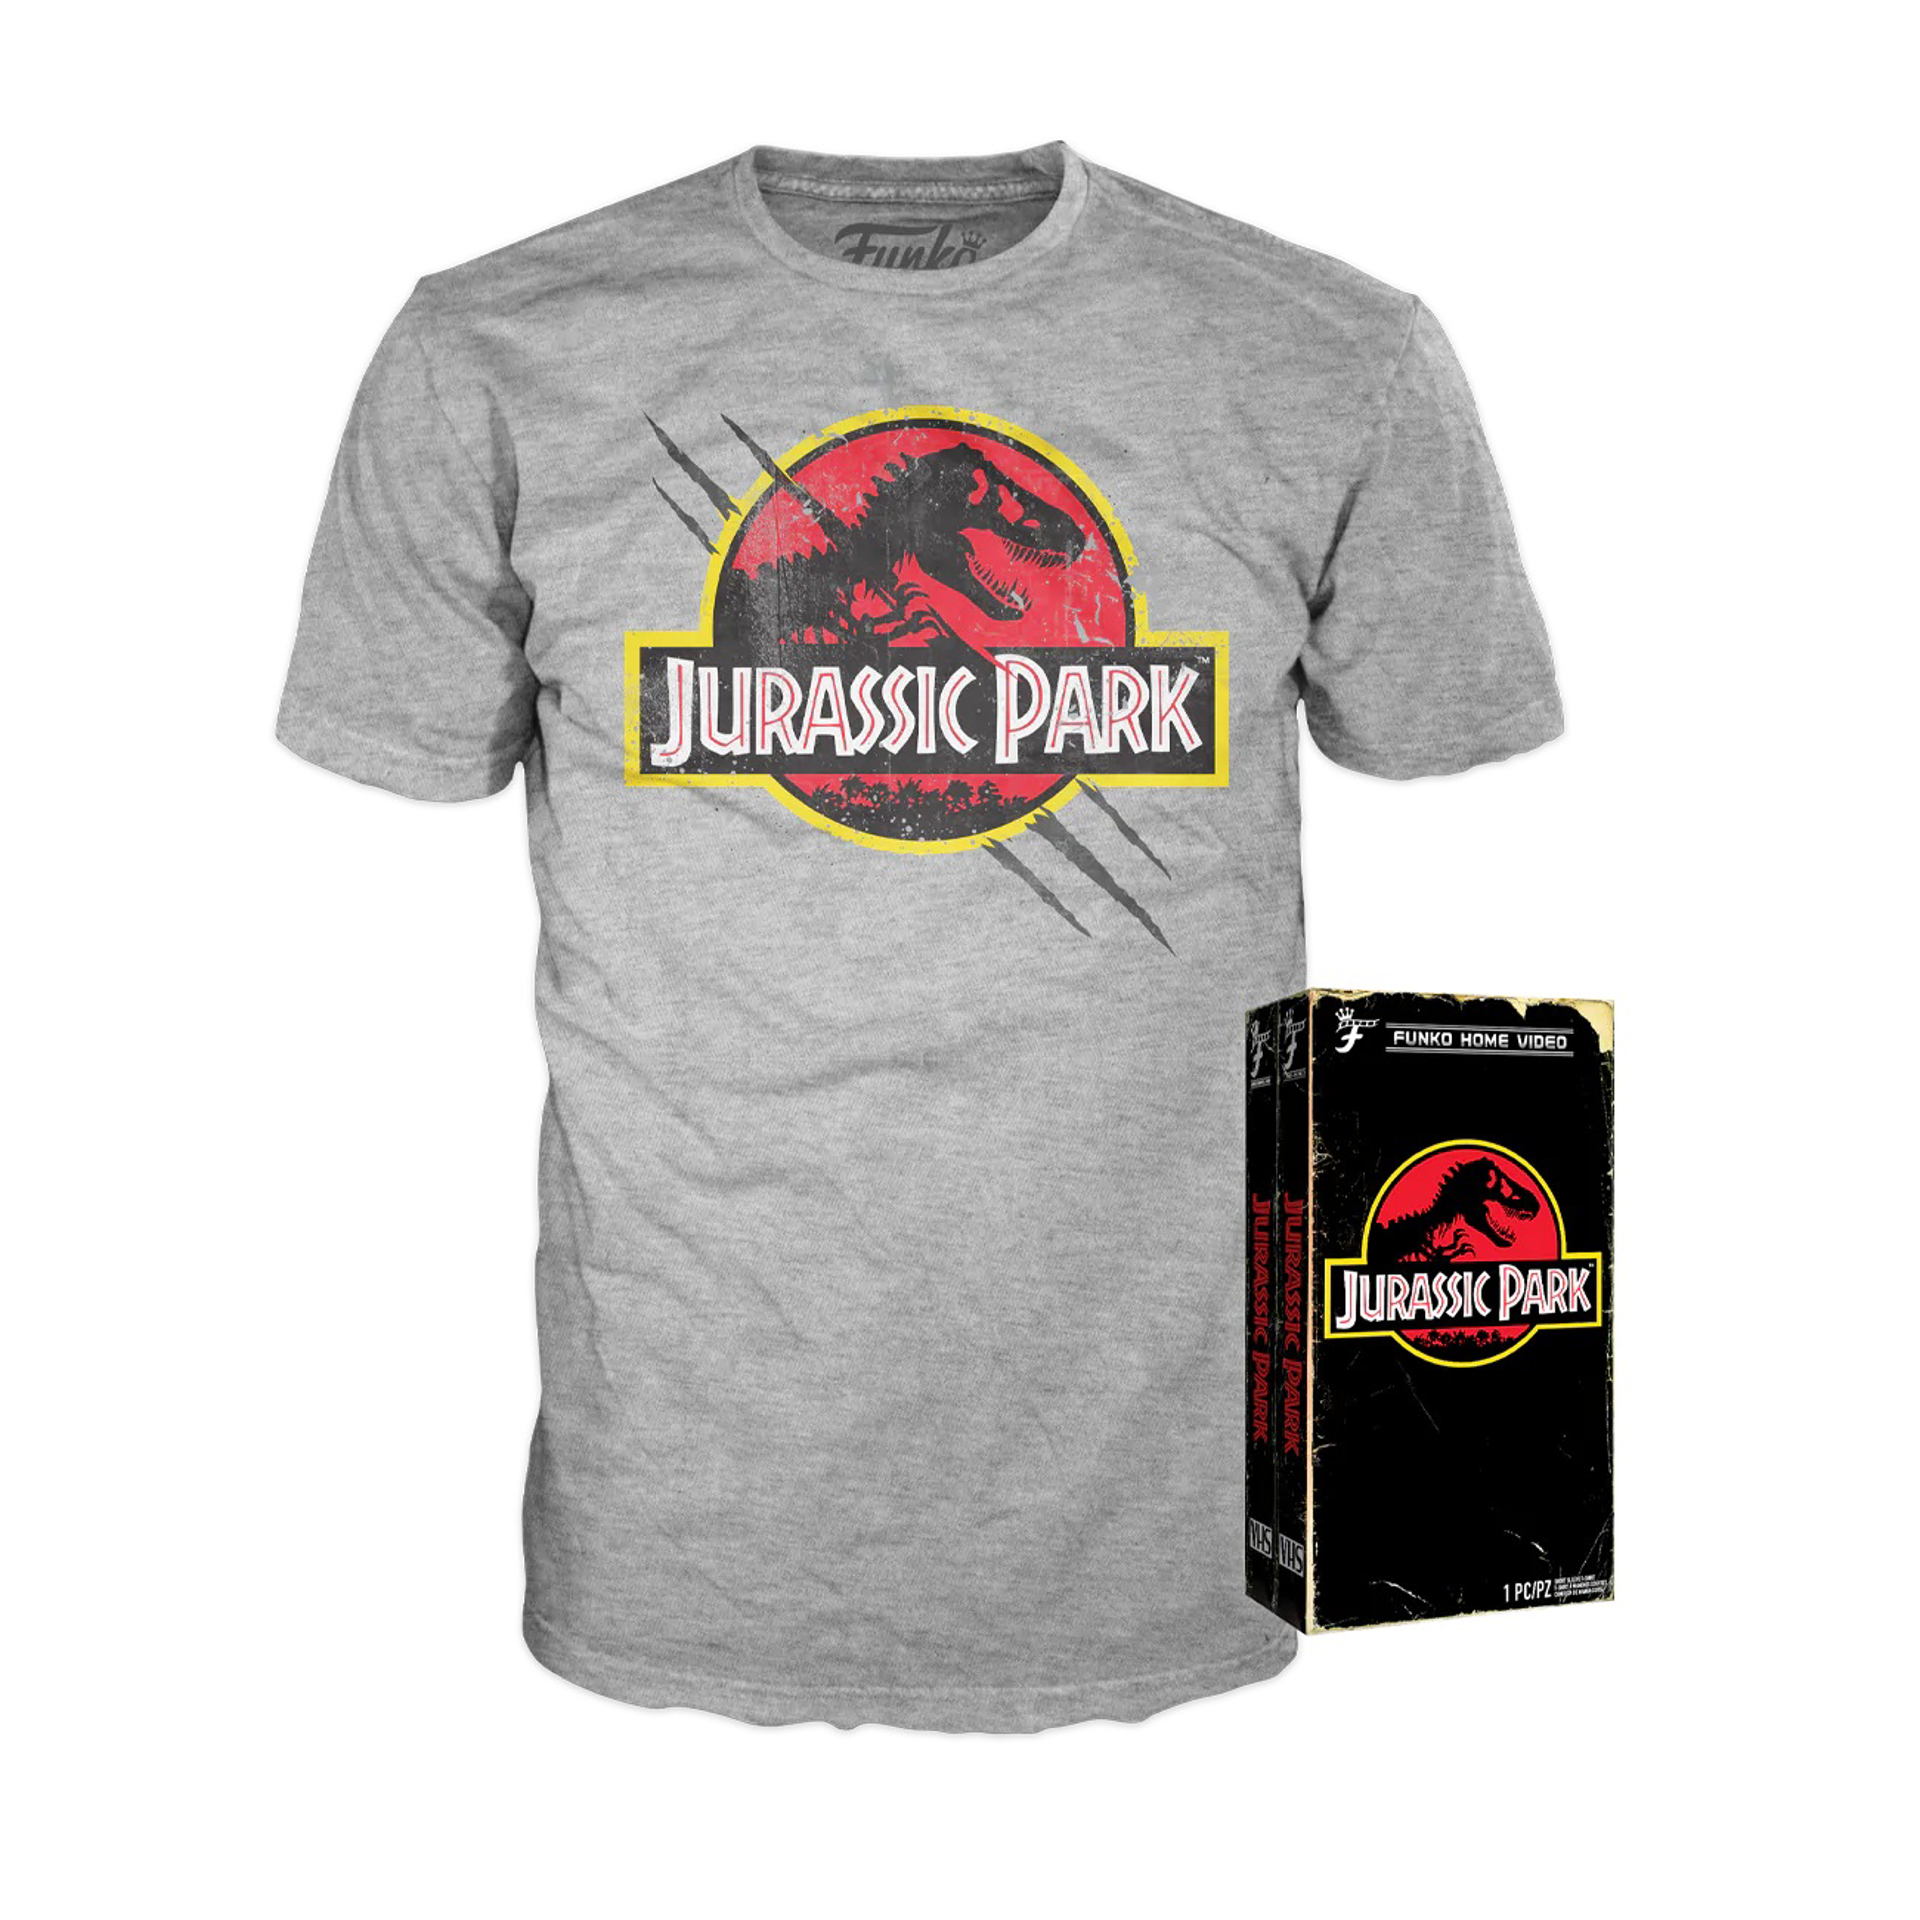 Funko Boxed Tee: Jurassic Park - VHS Boxed with Logo - M